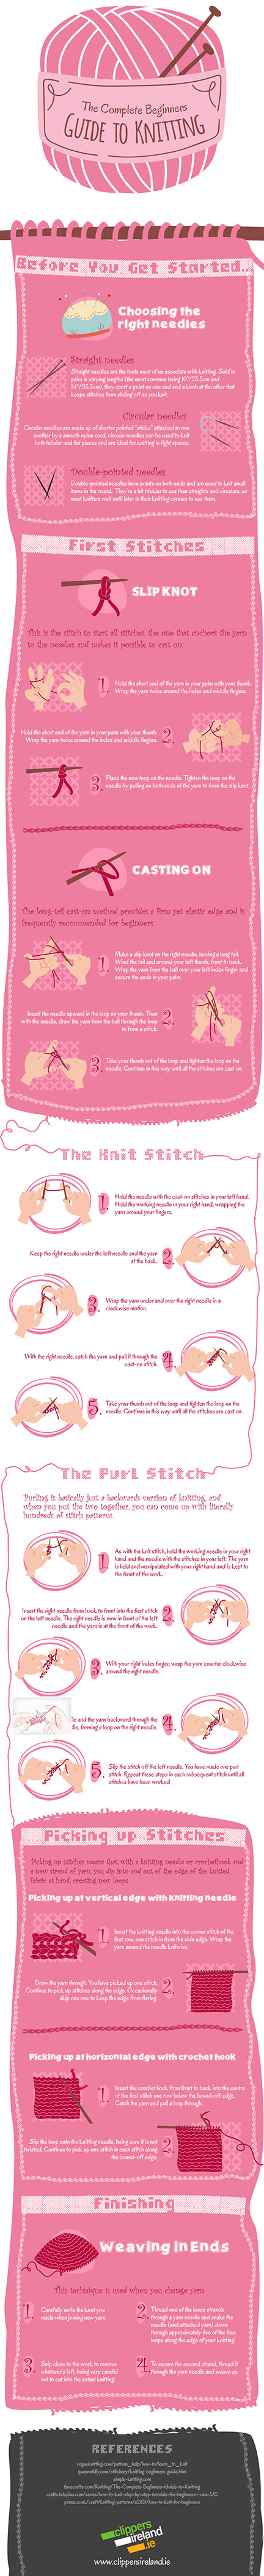 beginners-guide-to-knitting-clippers-ireland-infographic6inch